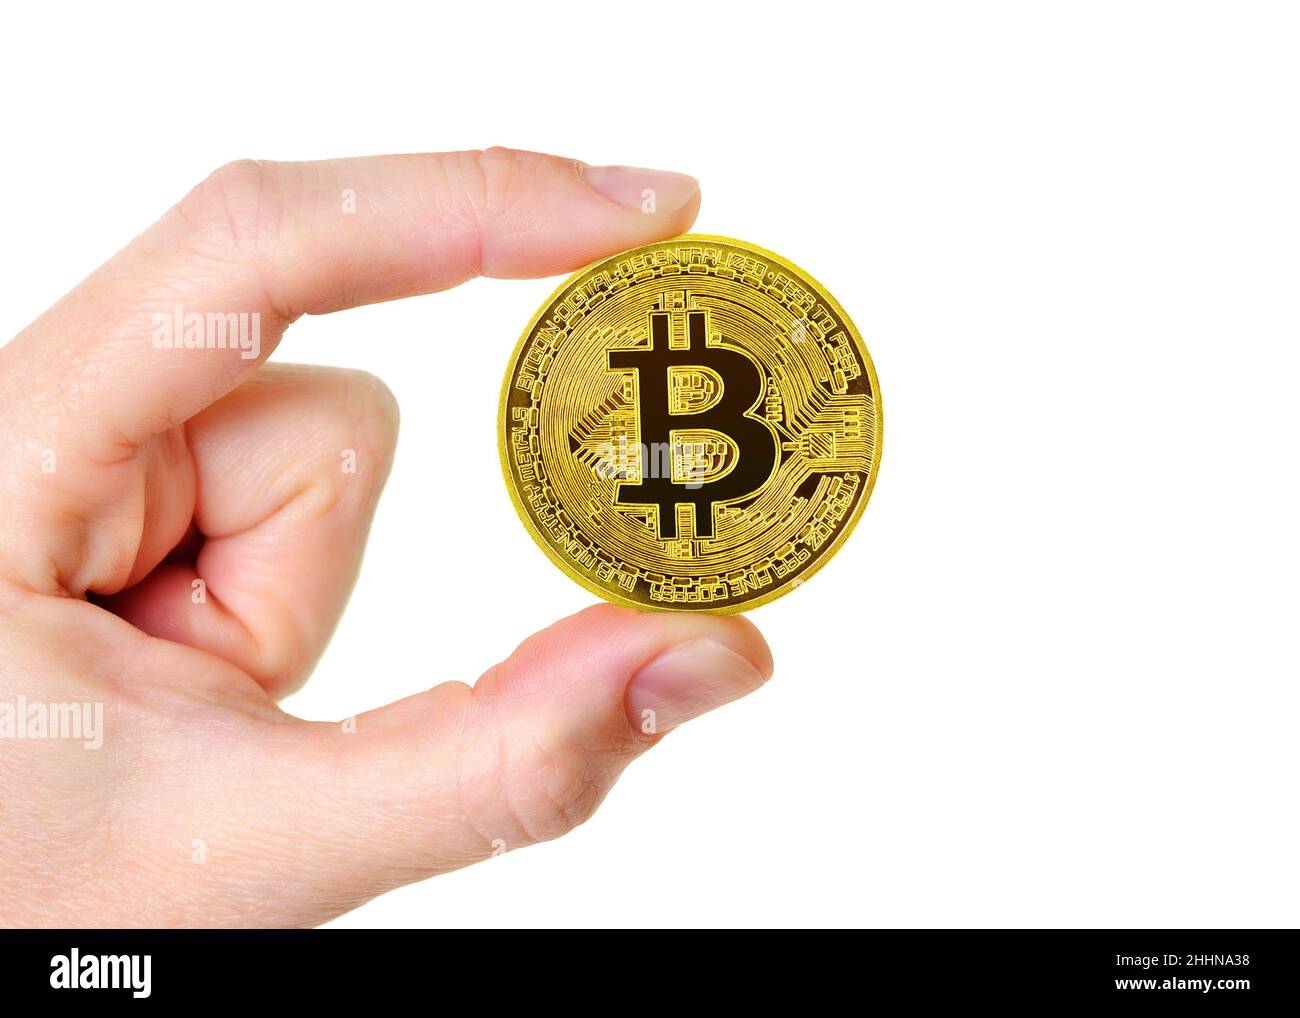 Bitcoin Cryptocurrency Coin Held Against a White Background Stock Photo